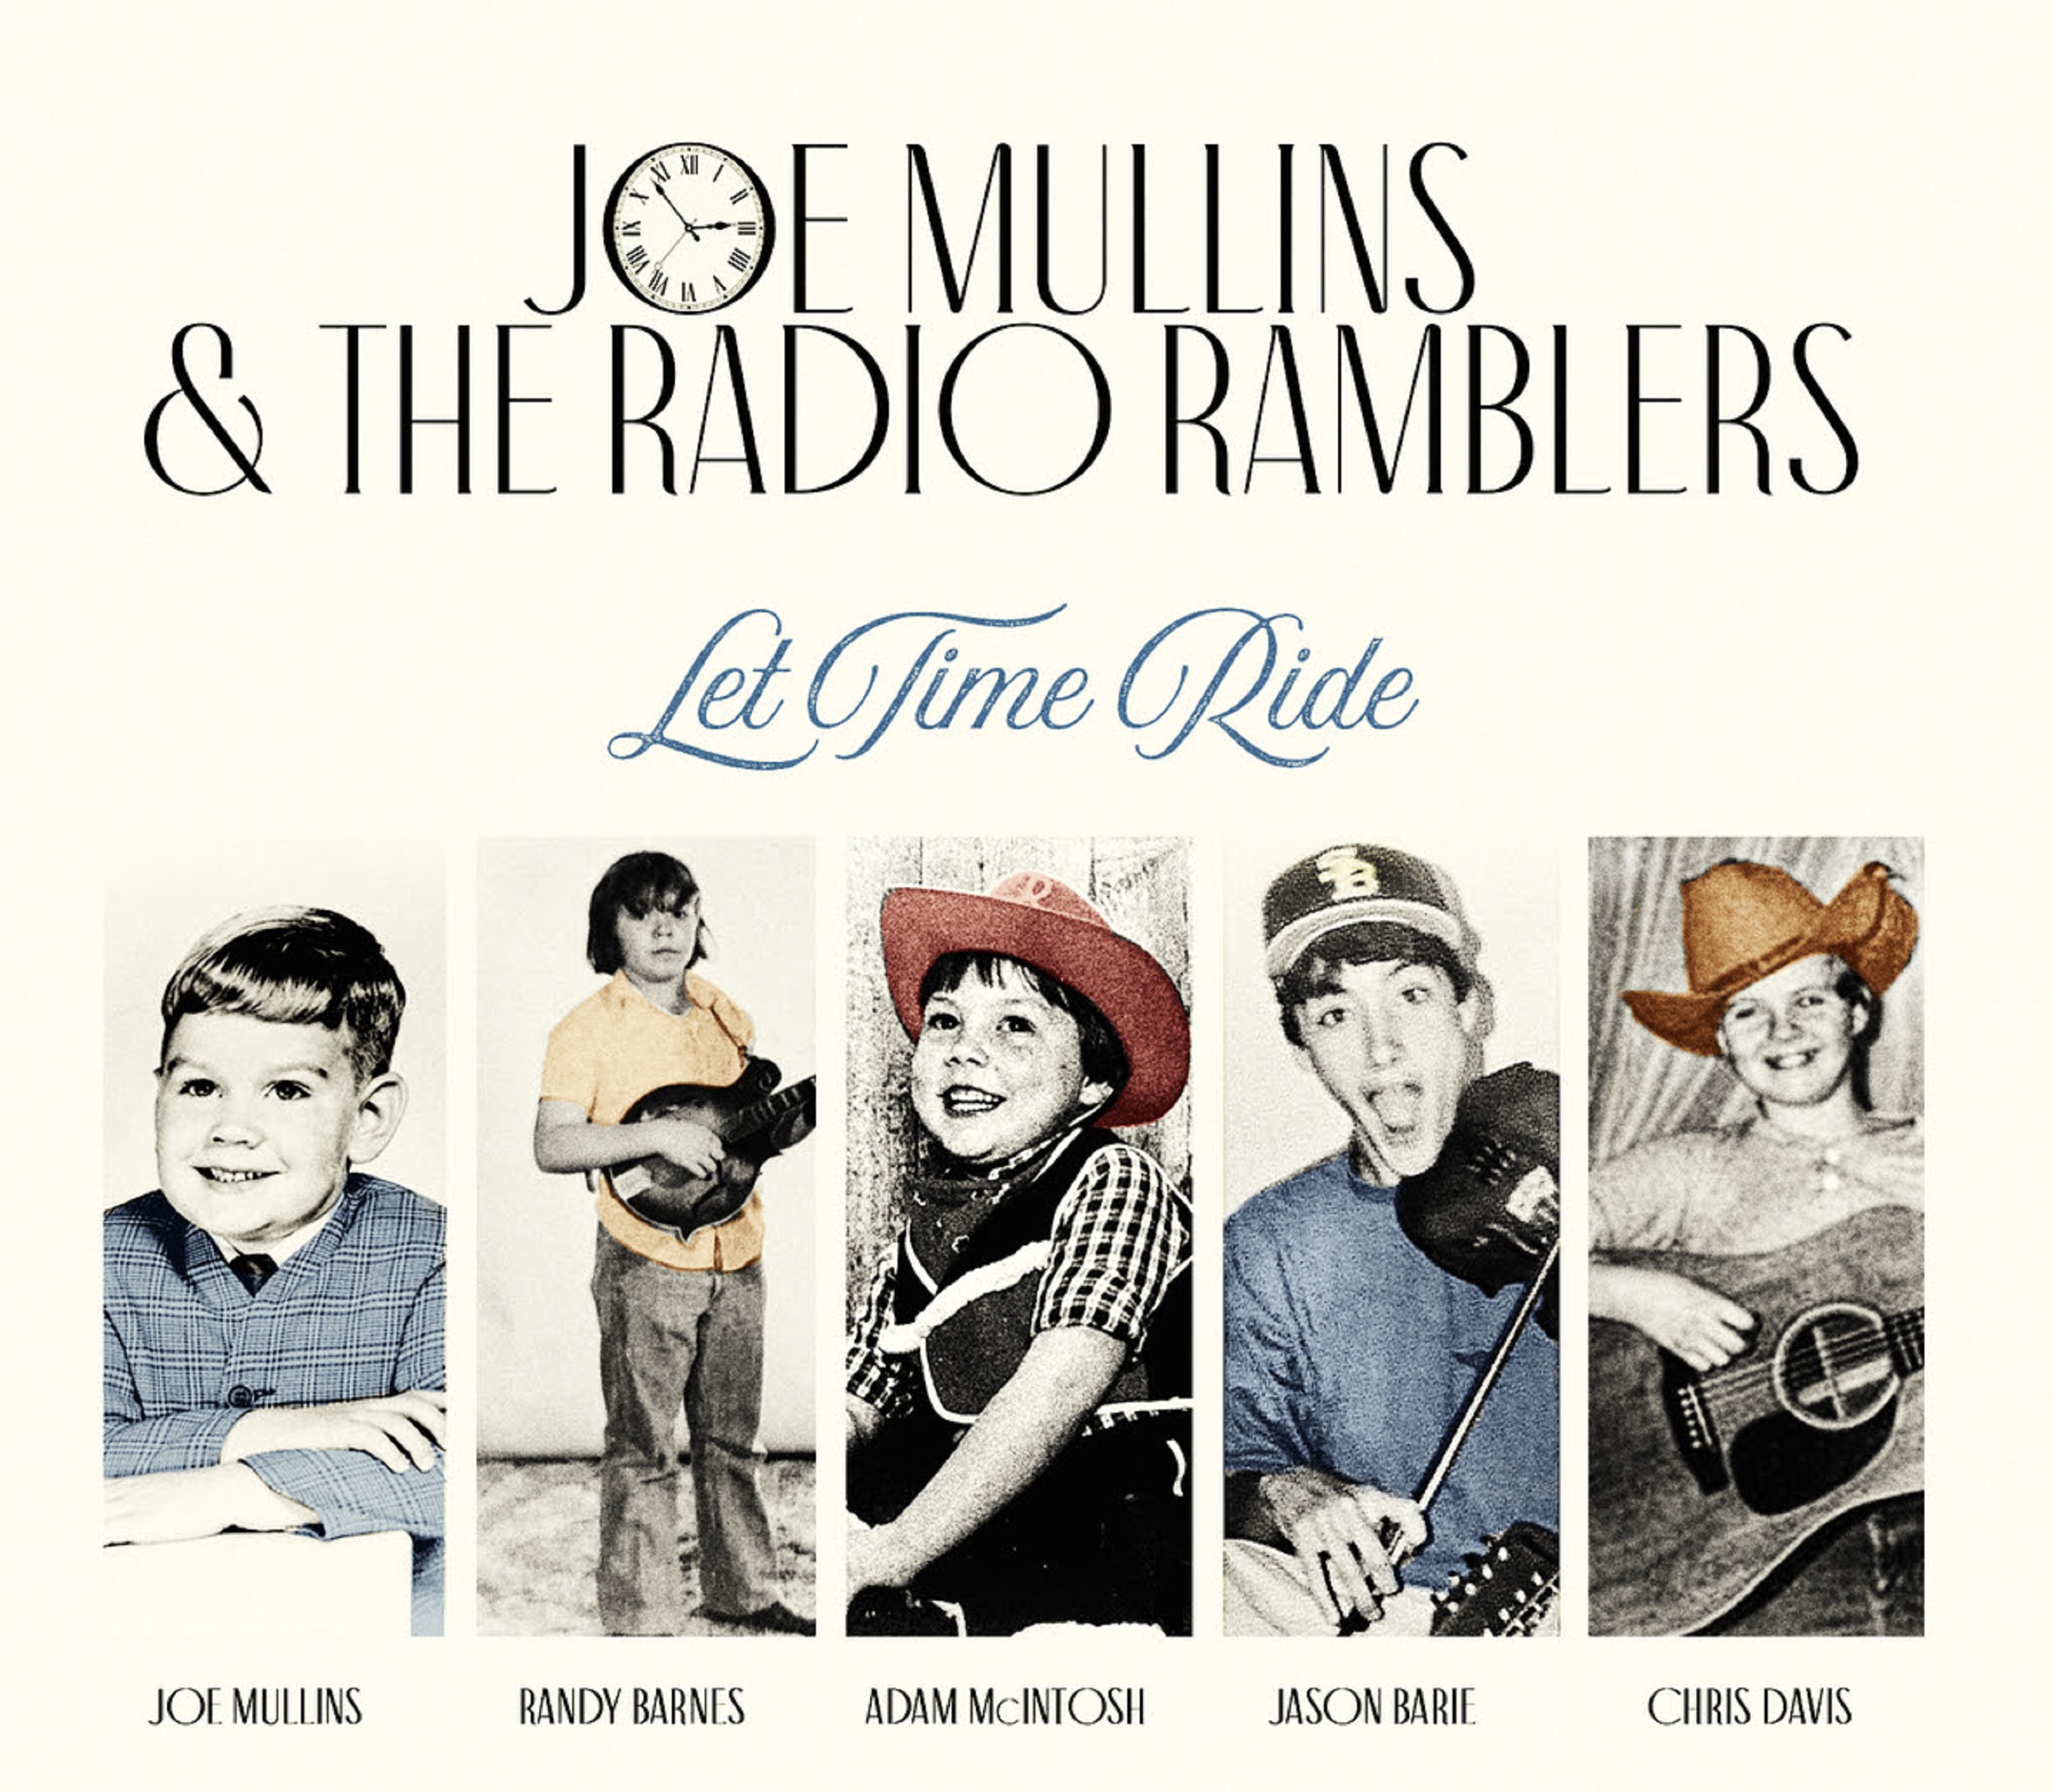 Joe Mullins & The Radio Ramblers Announce Forthcoming LP - Let Time Ride - Out March 17